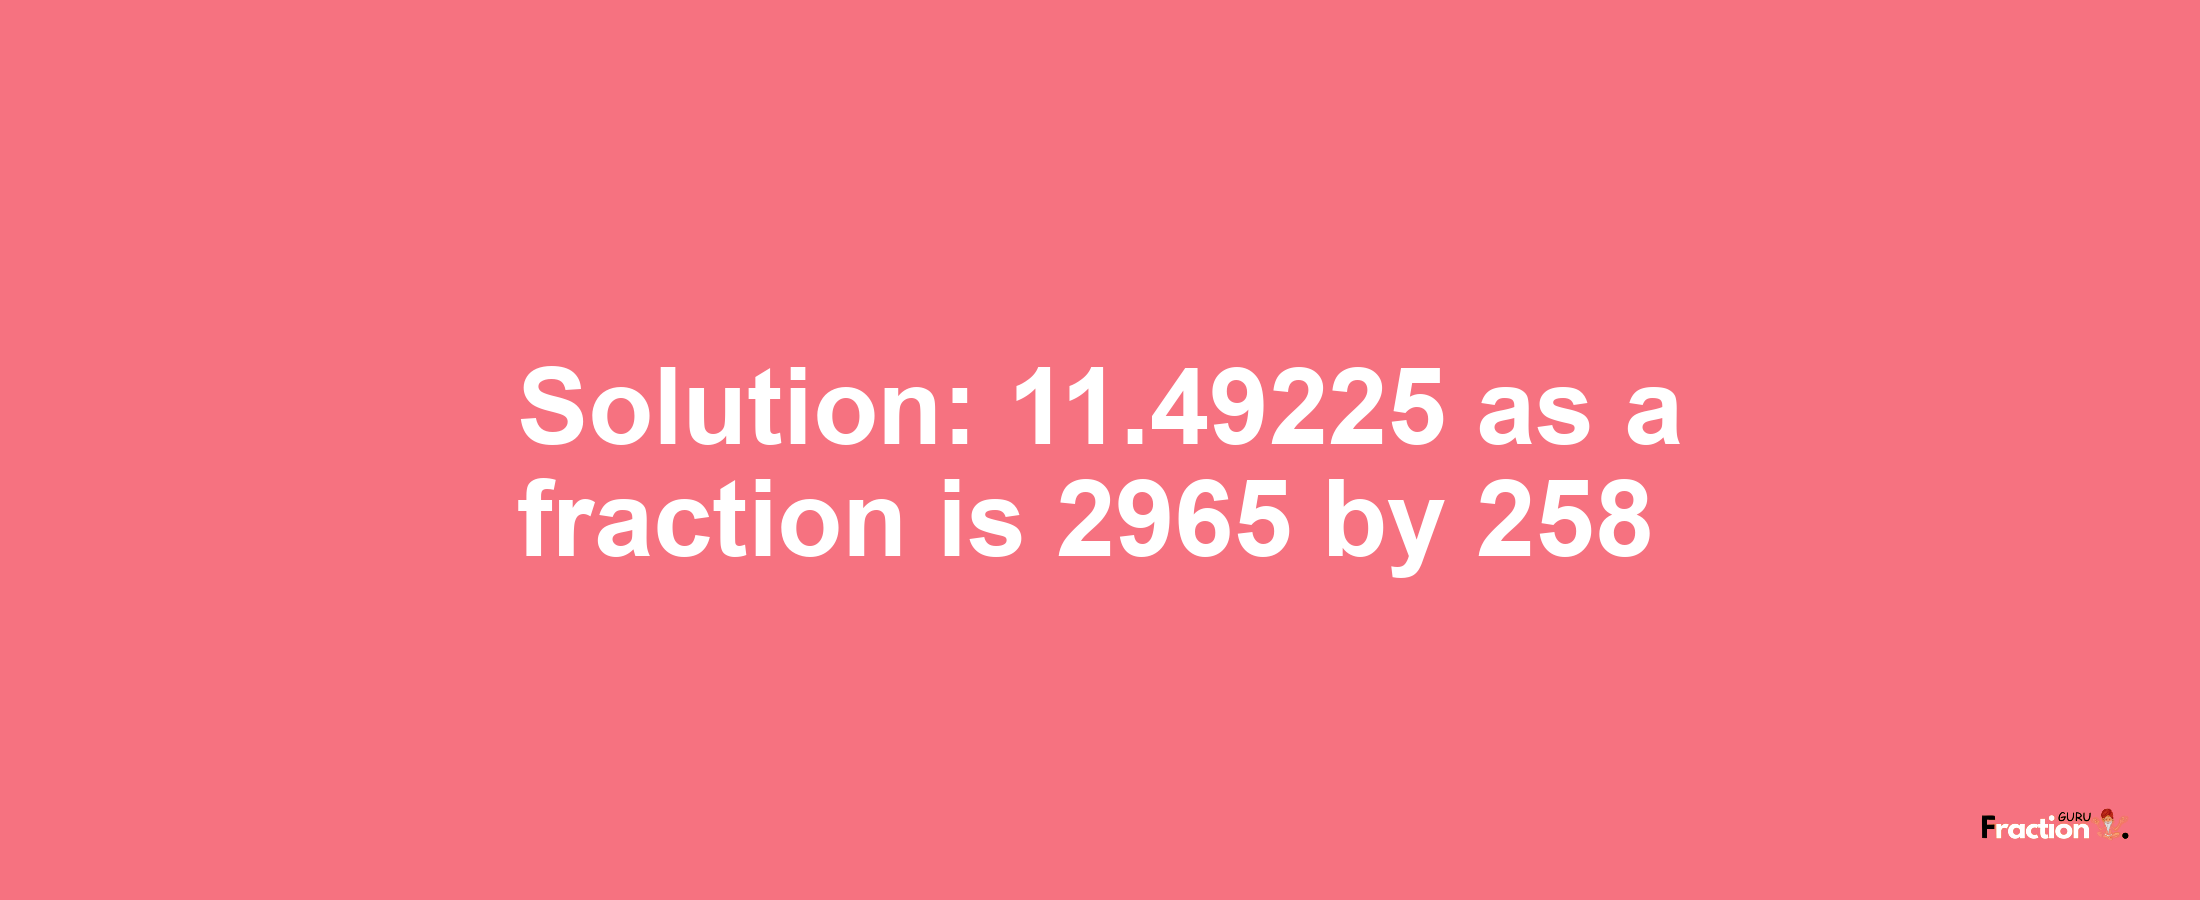 Solution:11.49225 as a fraction is 2965/258